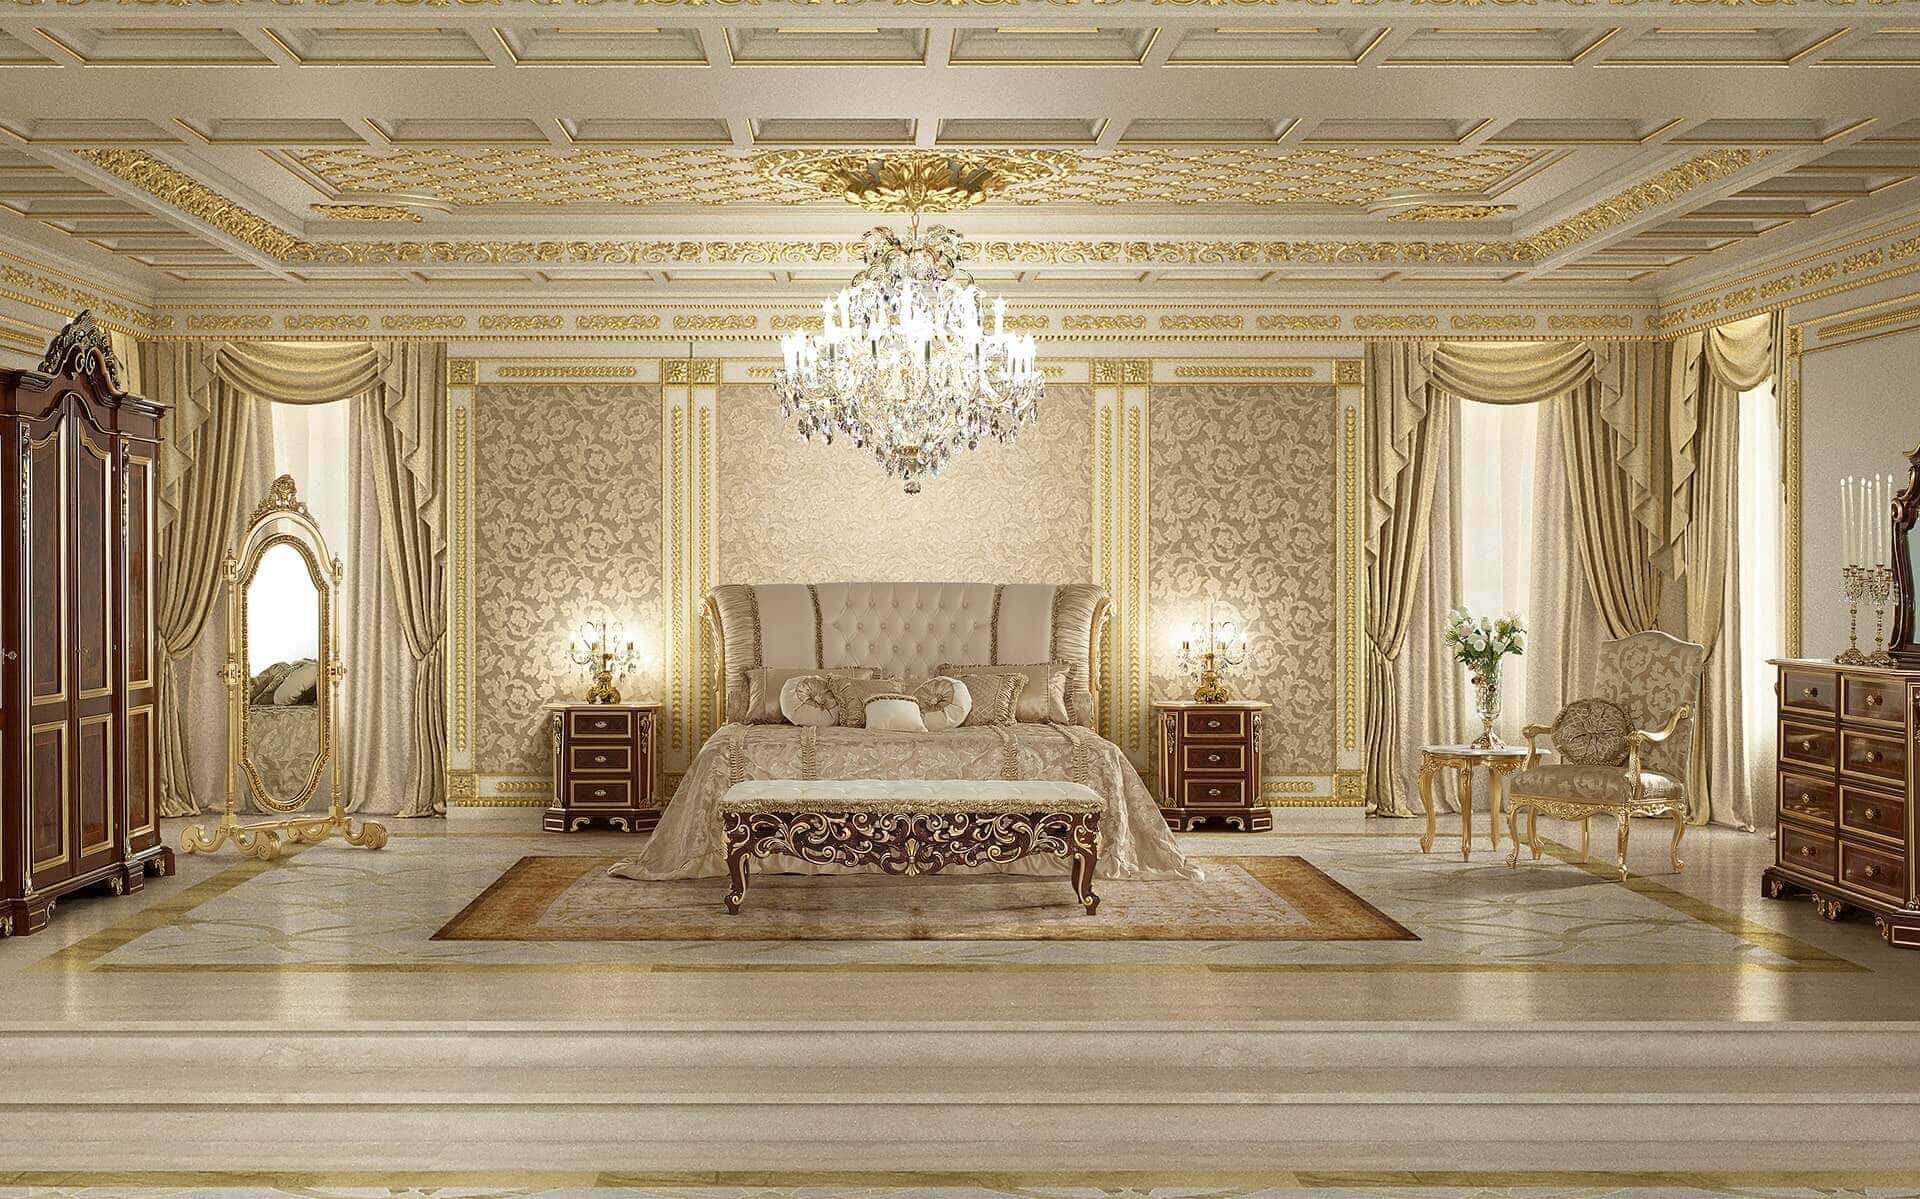 High-end Italian furniture creates a stunning custom-made master bedroom perfect for luxury interior design projects.Beautiful and sophisticated master bedroom classic interiors in solid wood material and high-end made in Italy quality. Customized bedroom furniture for the most refined royal palaces, villas and home decorations. Ornamental handmade golden leaf details. Best quality and top design double bed, luxury night tables, elegant pouffe, baroque style wardrobe, venetian dressing table. Bespoke classic Italian furniture with refined design and made in Italy unique craftsmanship.